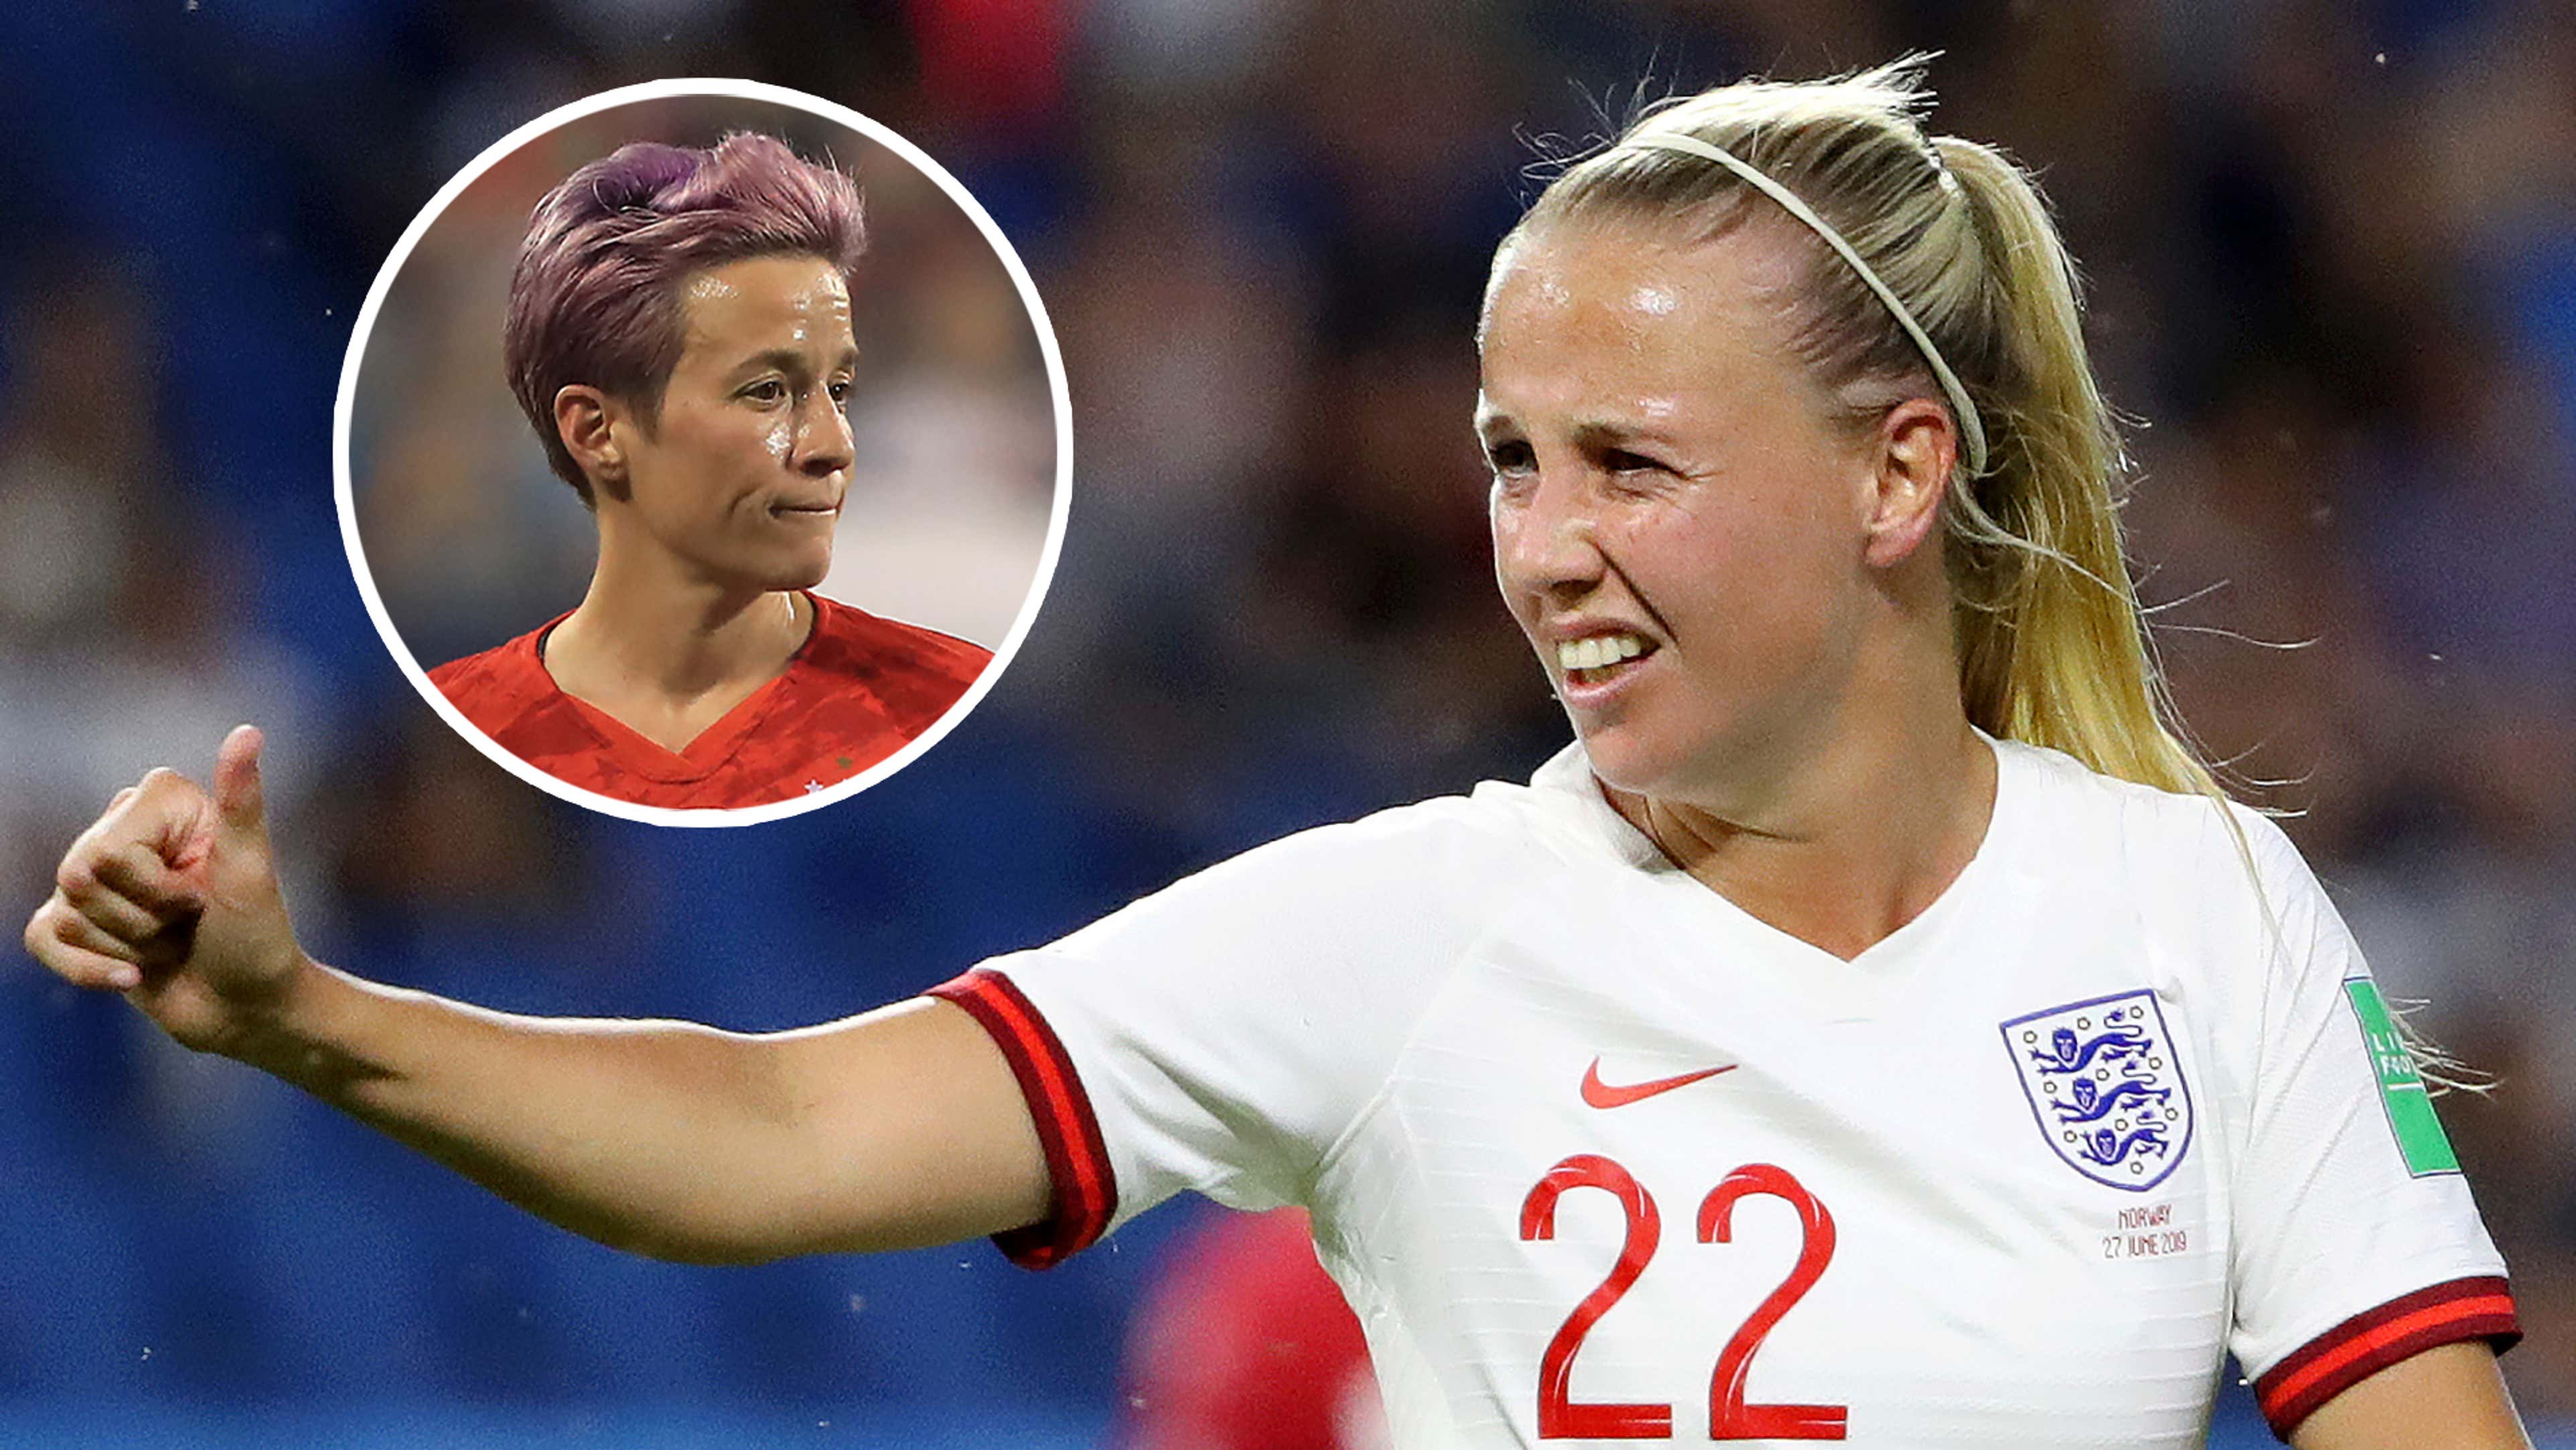 England 1-2 Brazil: Beth Mead proves she's more than ready to rise to Phil  Neville's Megan Rapinoe challenge after starring against Brazil